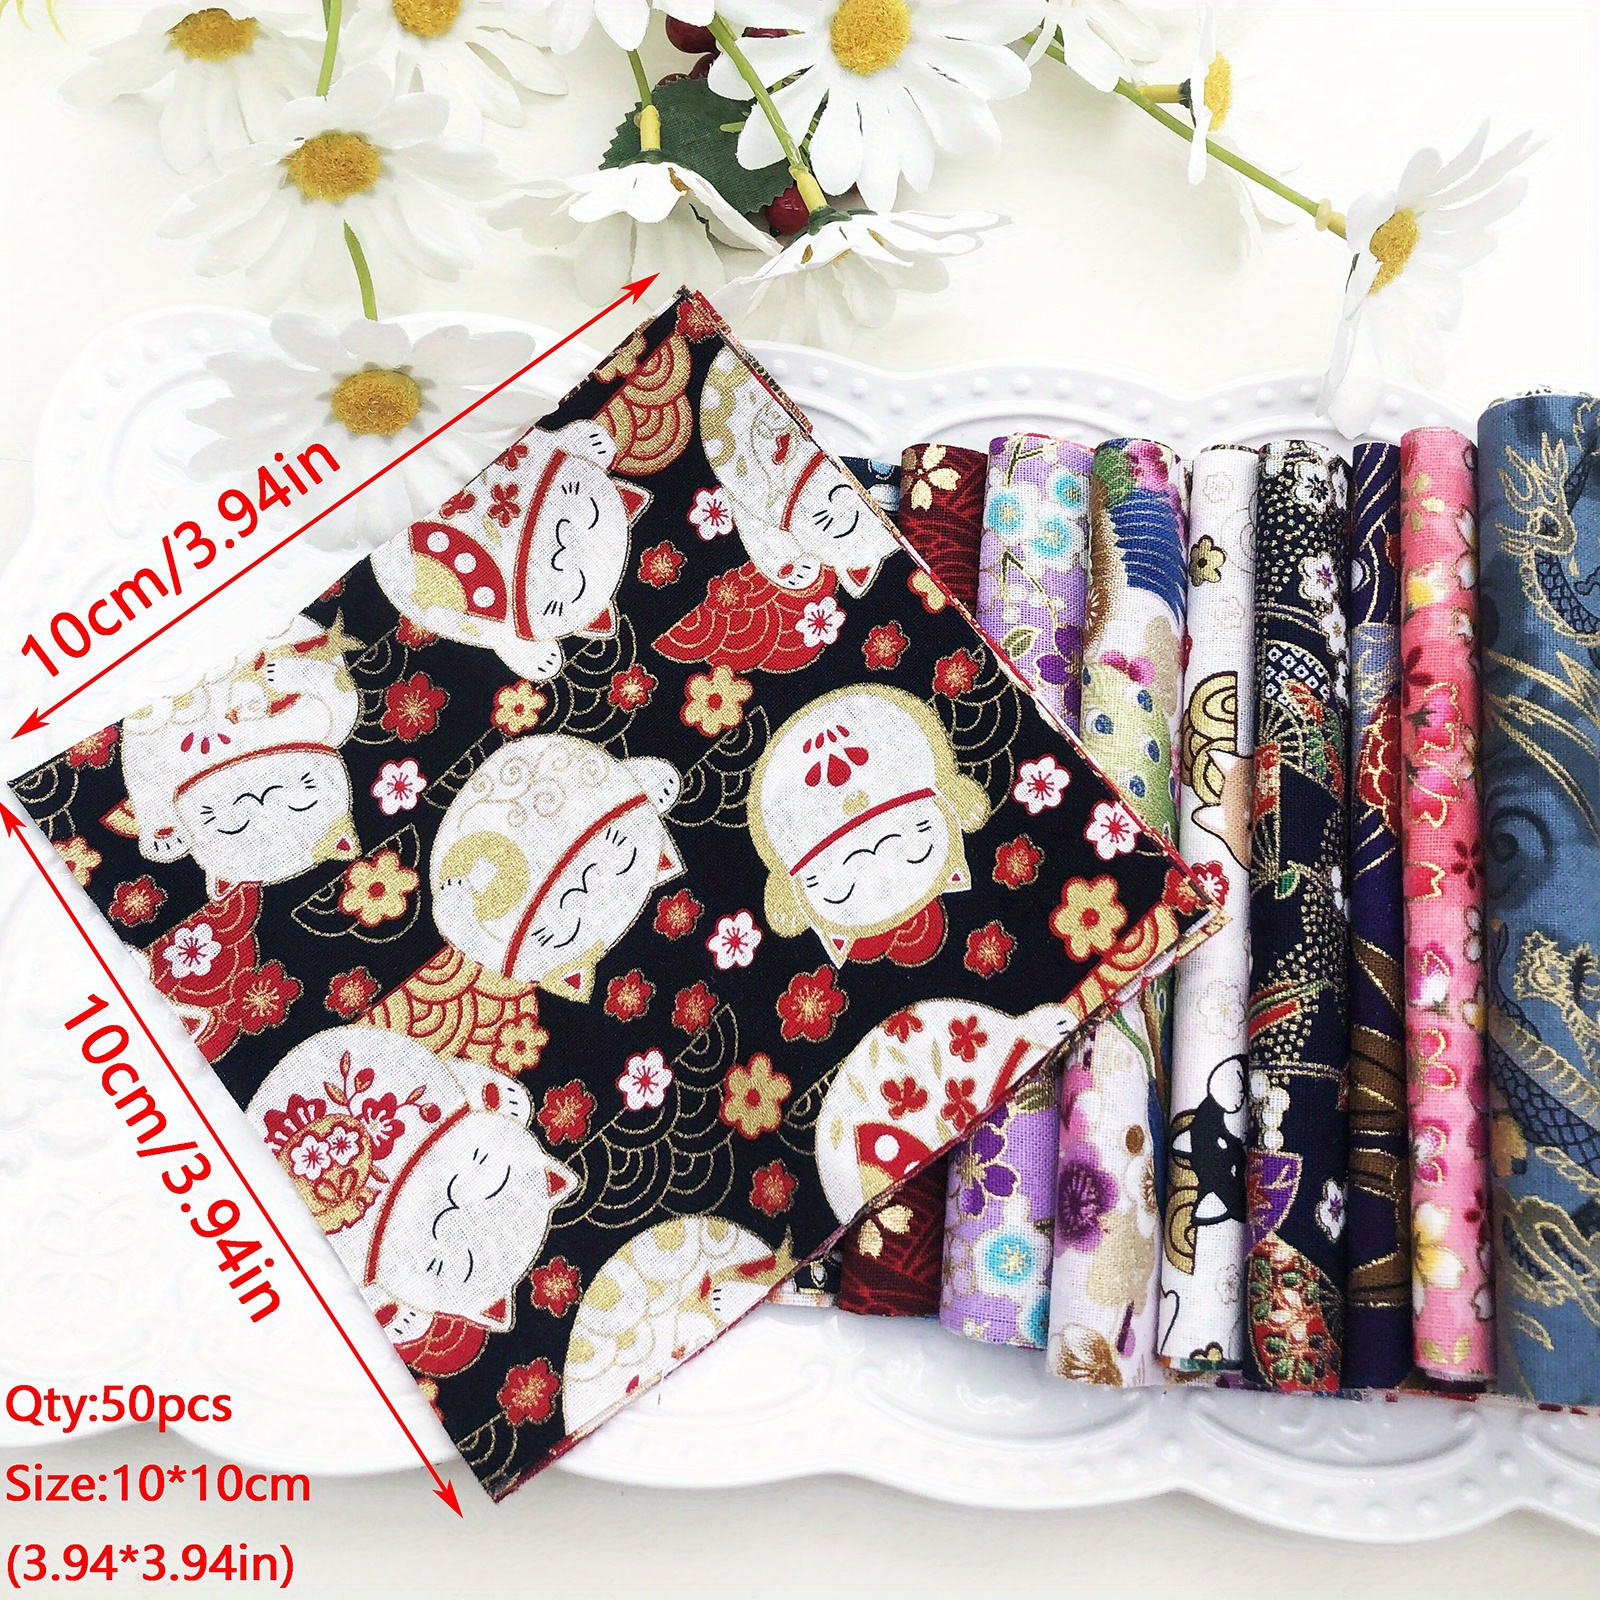  40 Pcs 10 x 10 Inches Cotton Fabric Bundle Squares Precut  Fabric Squares Multi Color Floral Fat Squares Sheets for Kids DIY Craft  Quilting Sewing (Vintage Patterns) : Arts, Crafts & Sewing